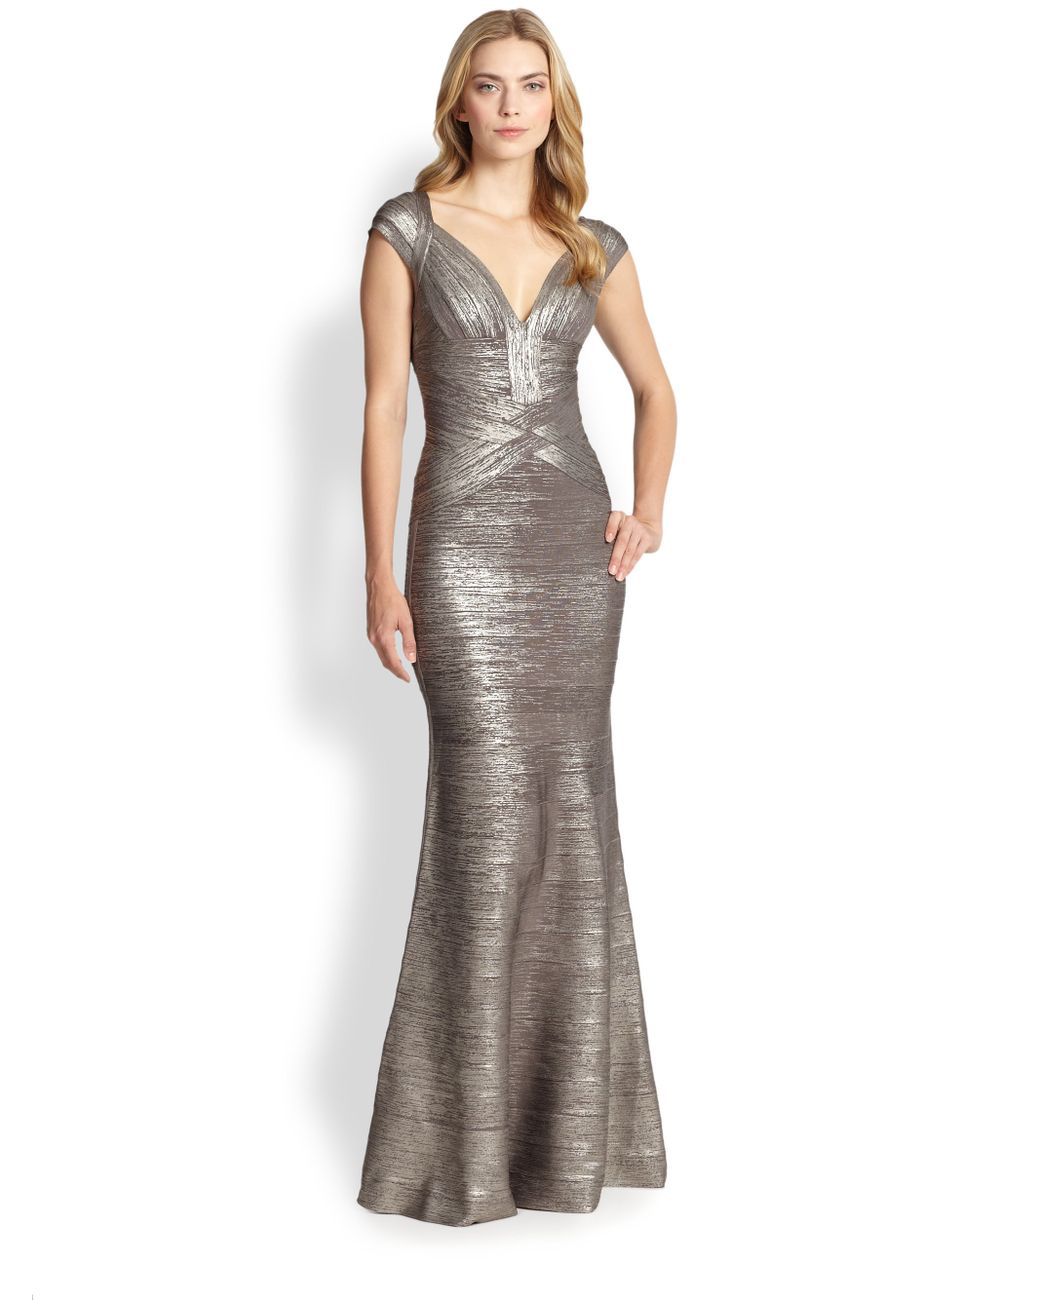 Buy HERVÉ LÉGER Metallic Coated Bandage Gown  Silver At 55 Off   Editorialist